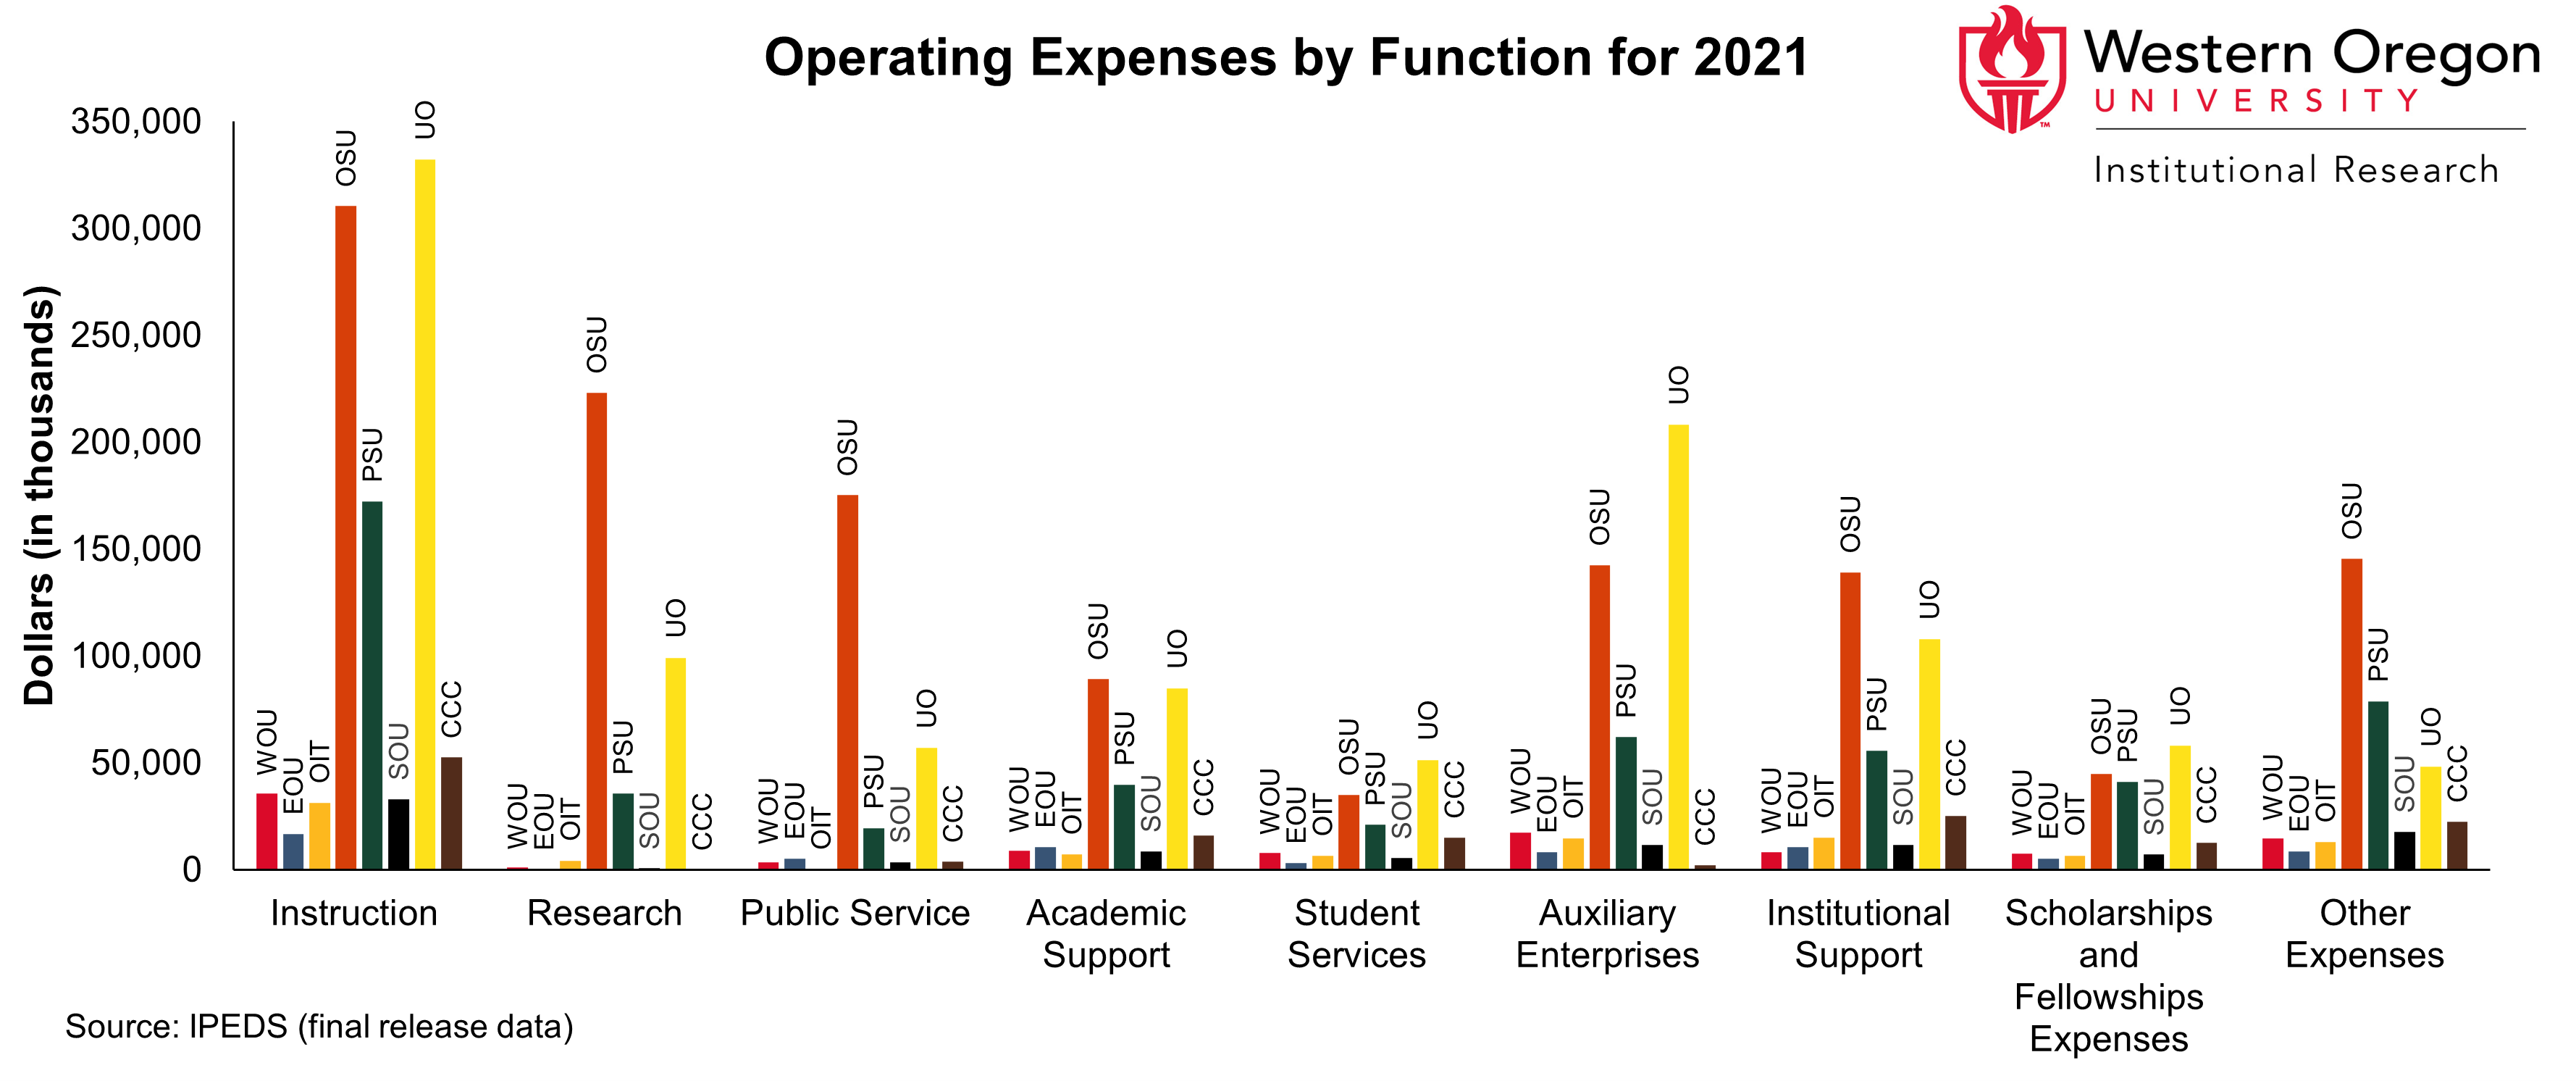 Bar graph of operating expenses at WOU and other Oregon Public Universities in 2021, broken out by institution and function